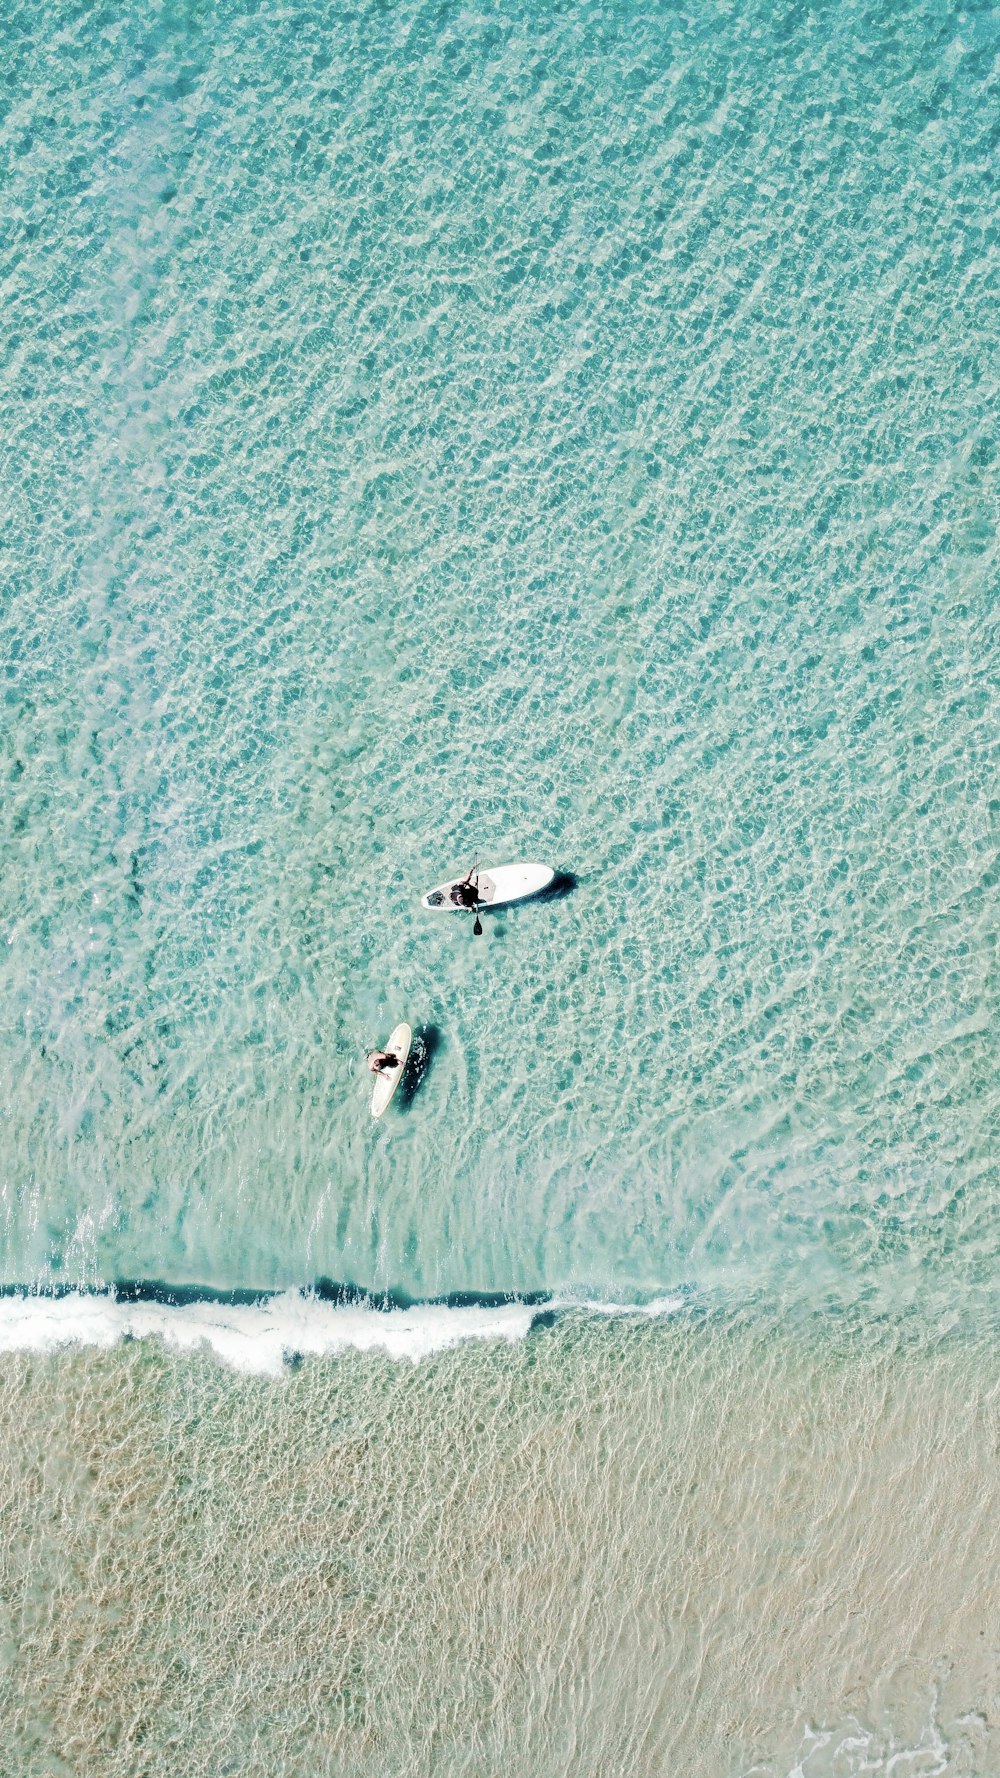 two surfers in the ocean with their surfboards